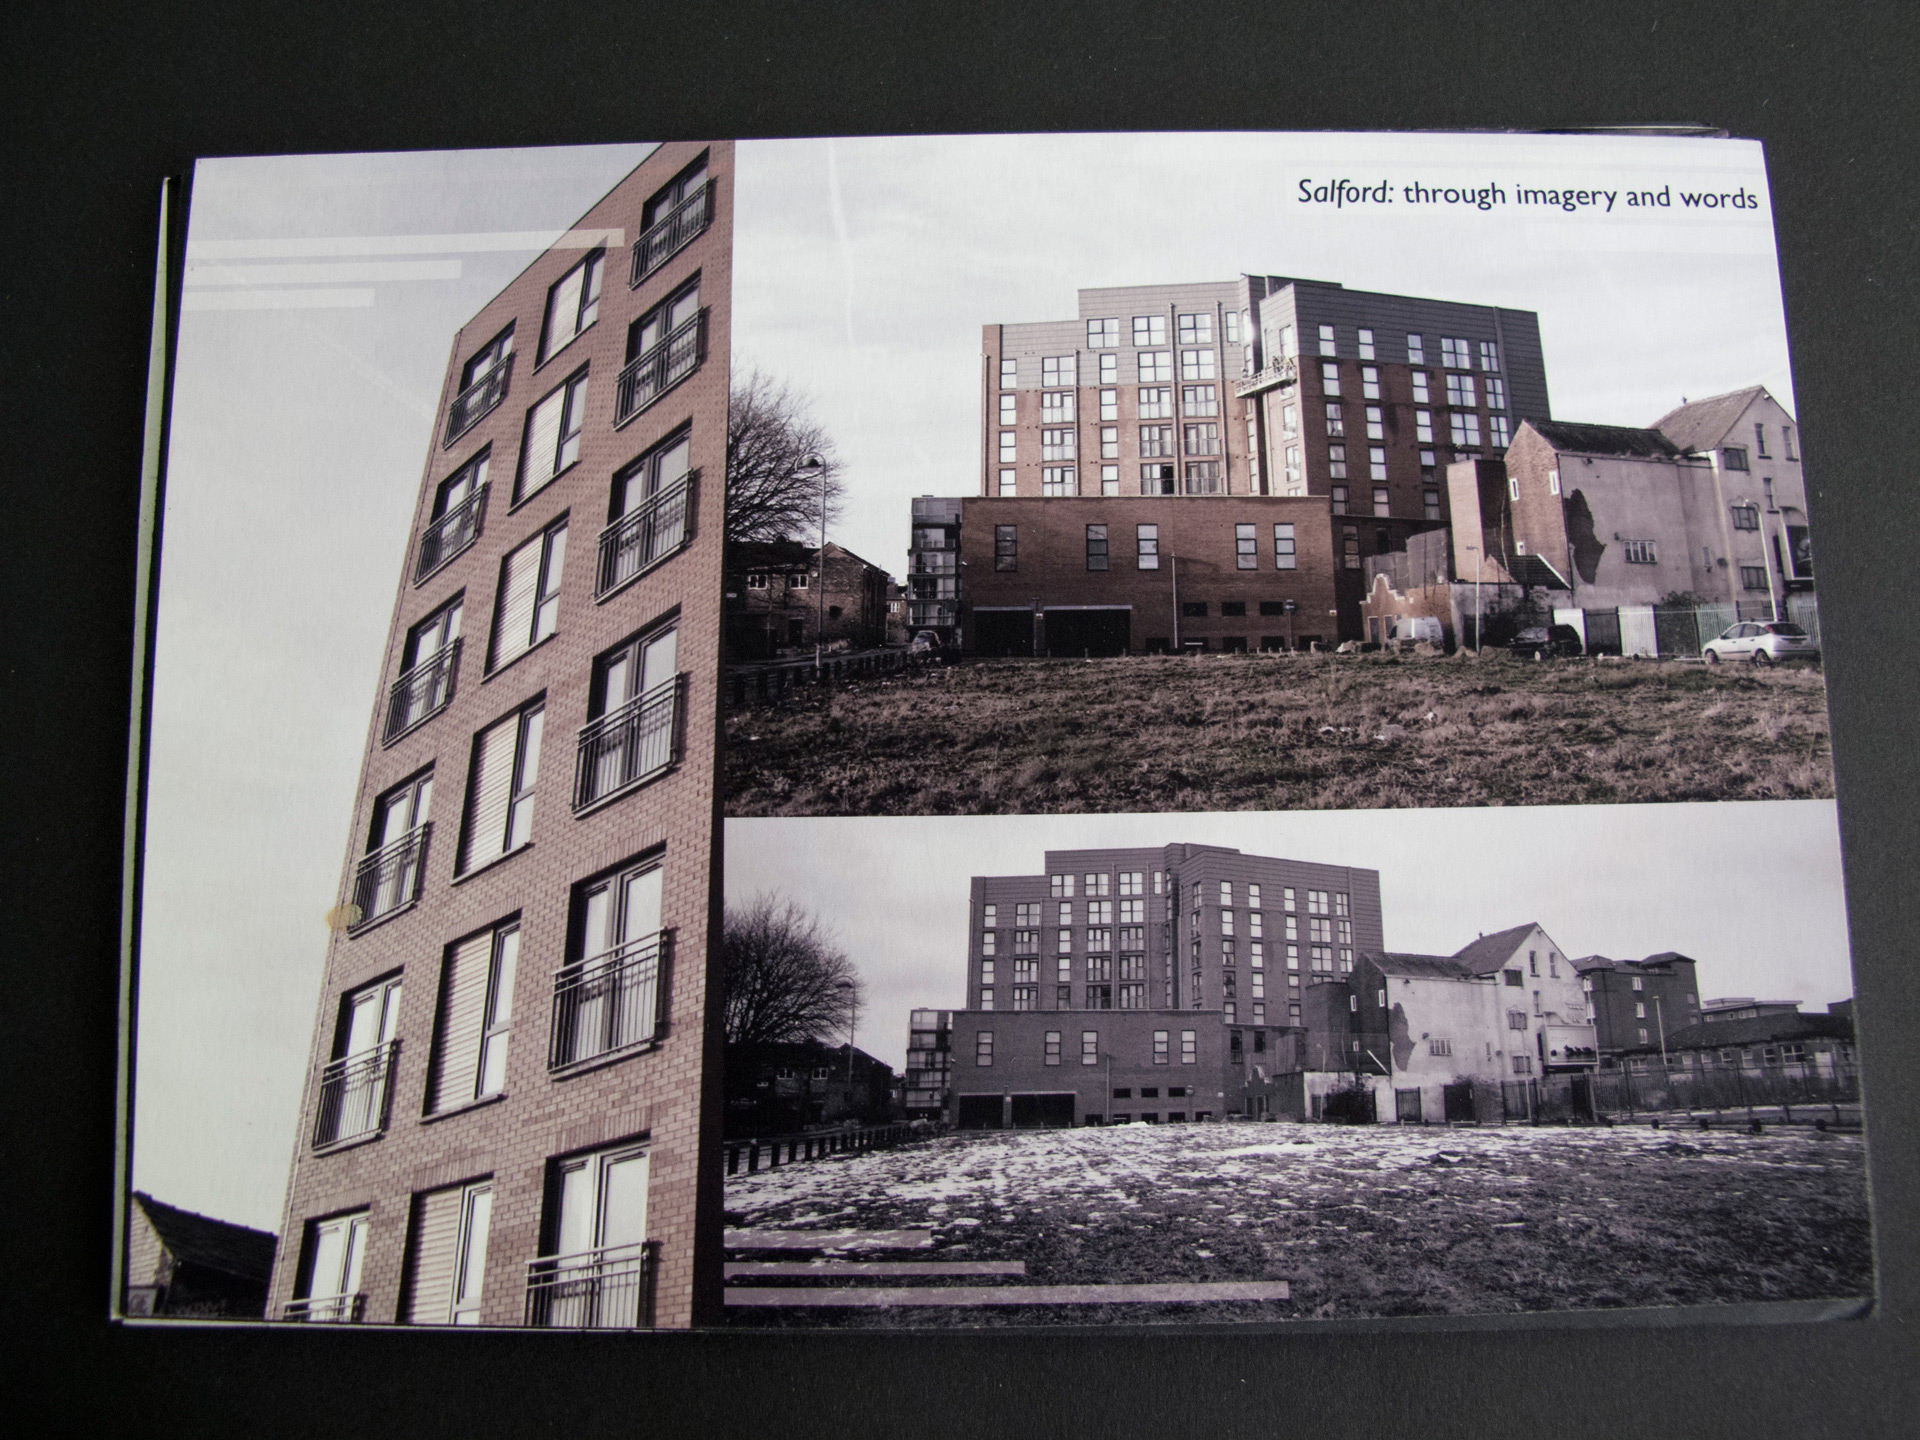 The front cover of the booklet displays a triptych of desaturated photographs. On the left, there is a picture of an apartment block. On the right, two stacked images are placed. The top one depicts a blend of modern and older buildings, while the one below showcases the same view on a snowy winter day.